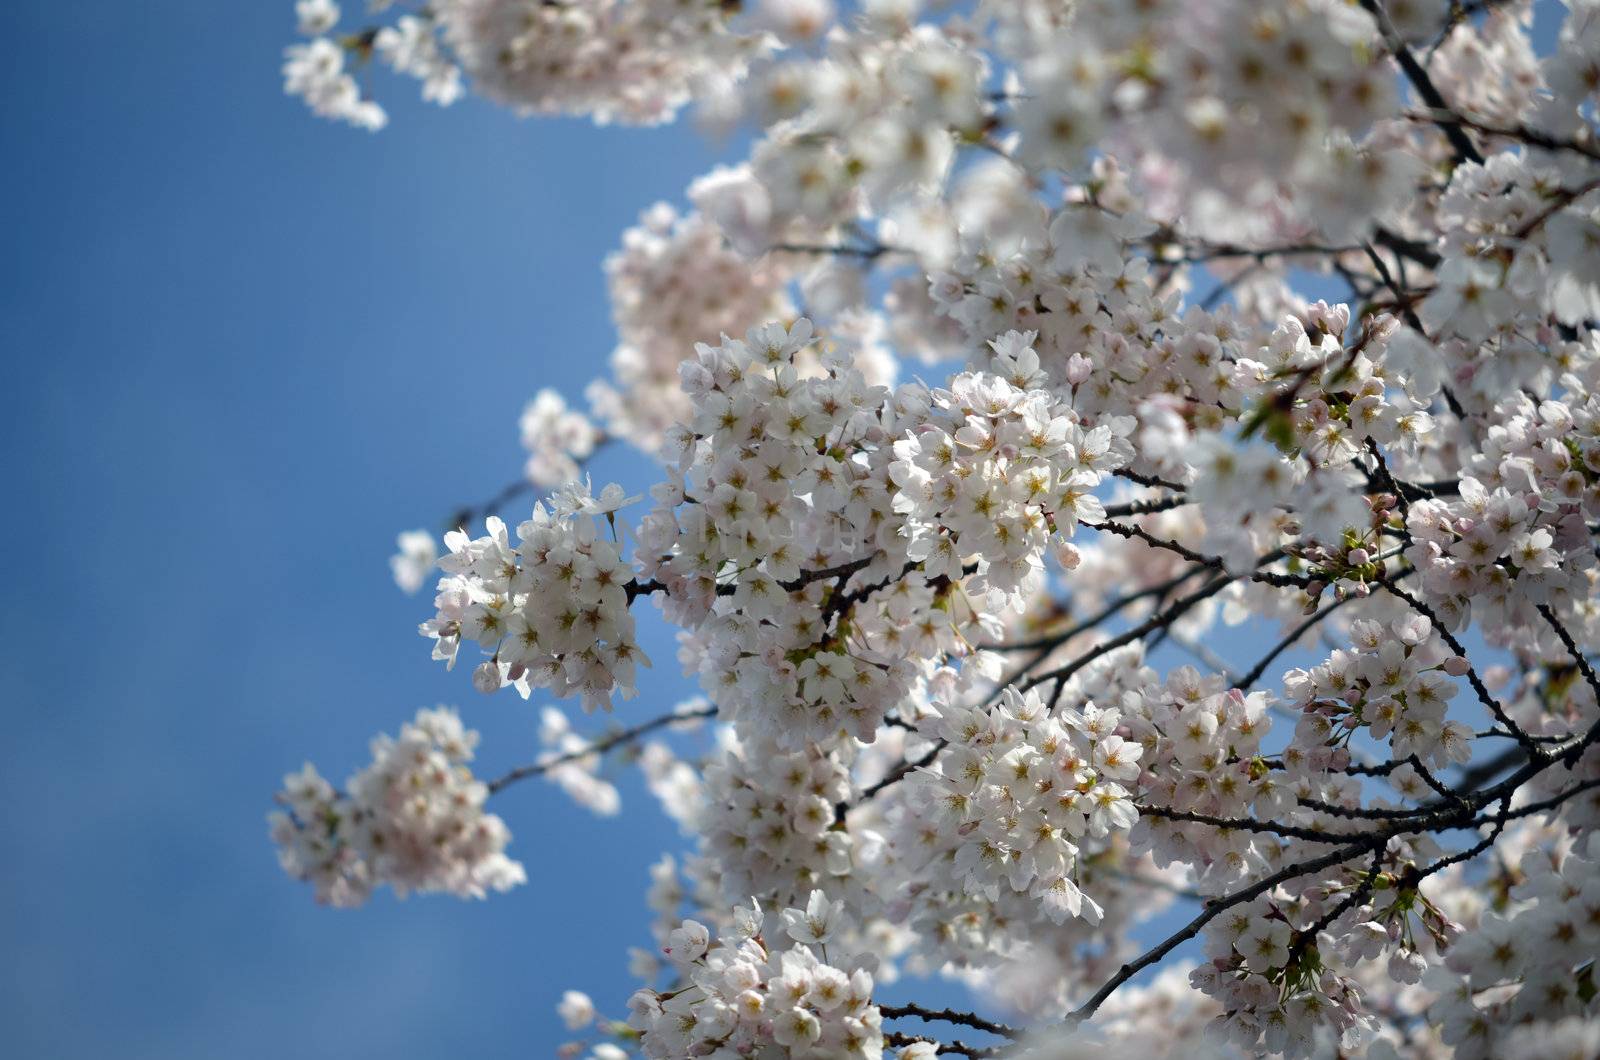 Cherry blossoms in bloom on a tree